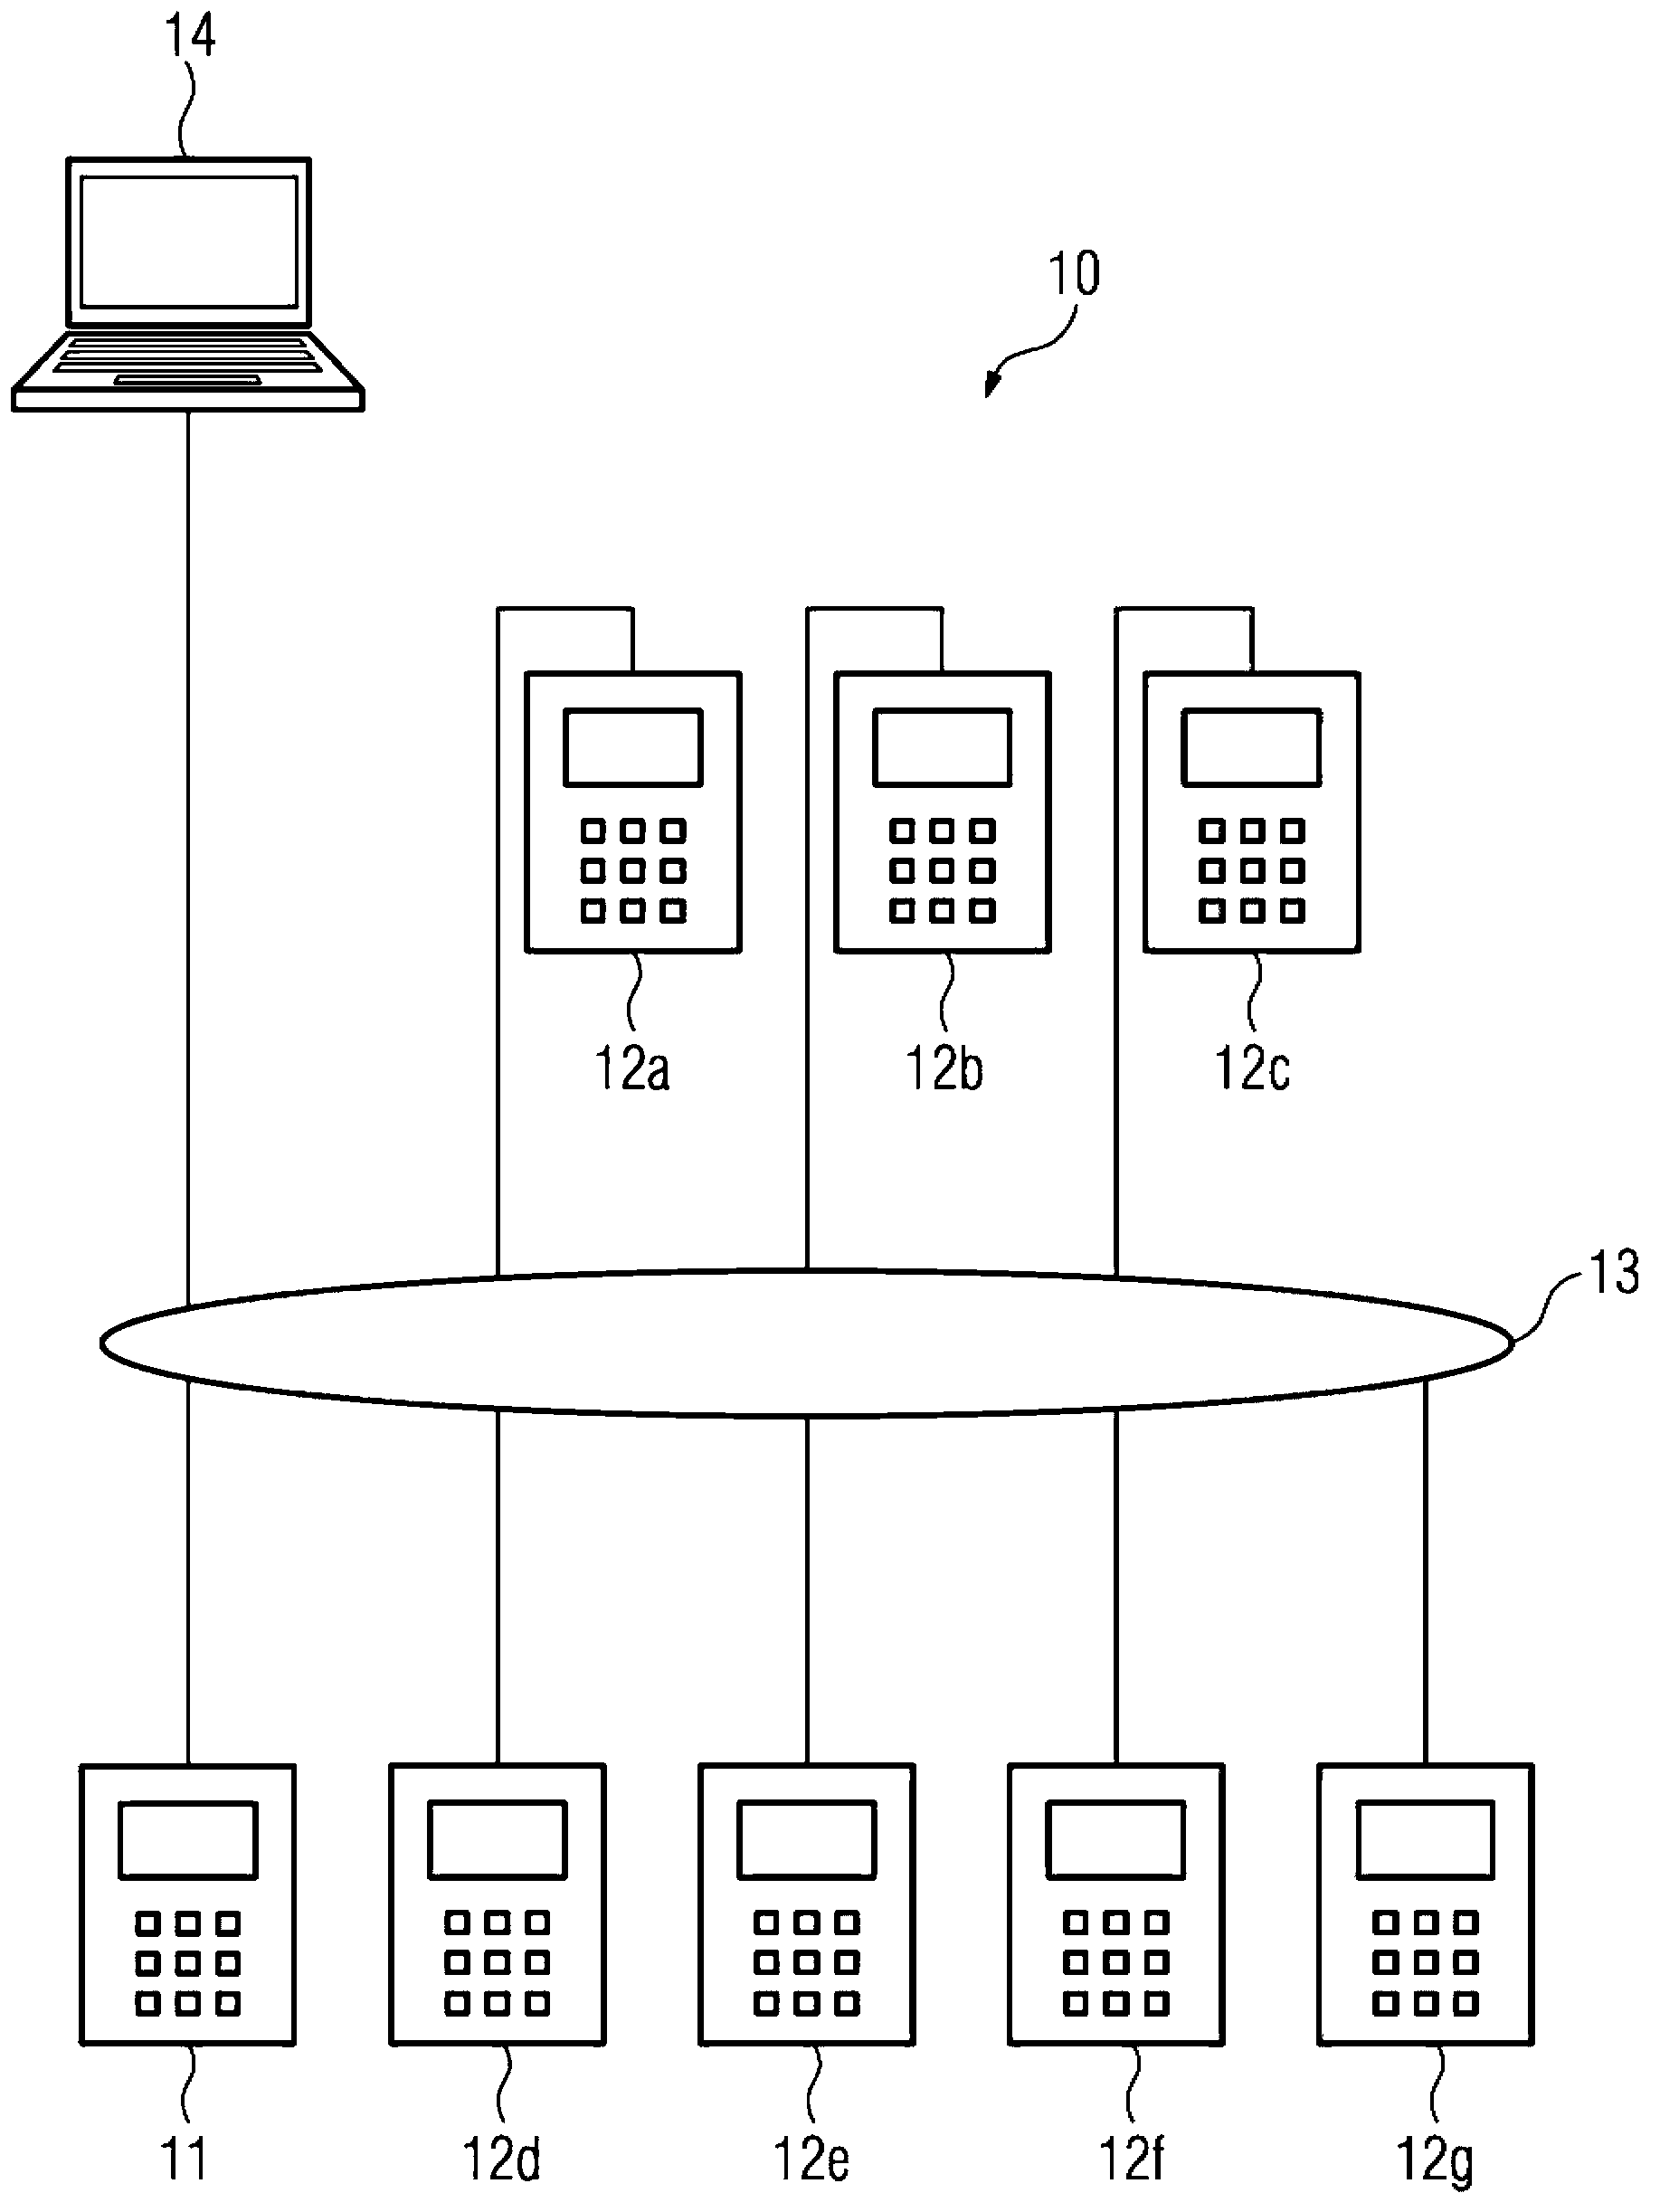 Configuration of the communication links of field devices in a power automation installation